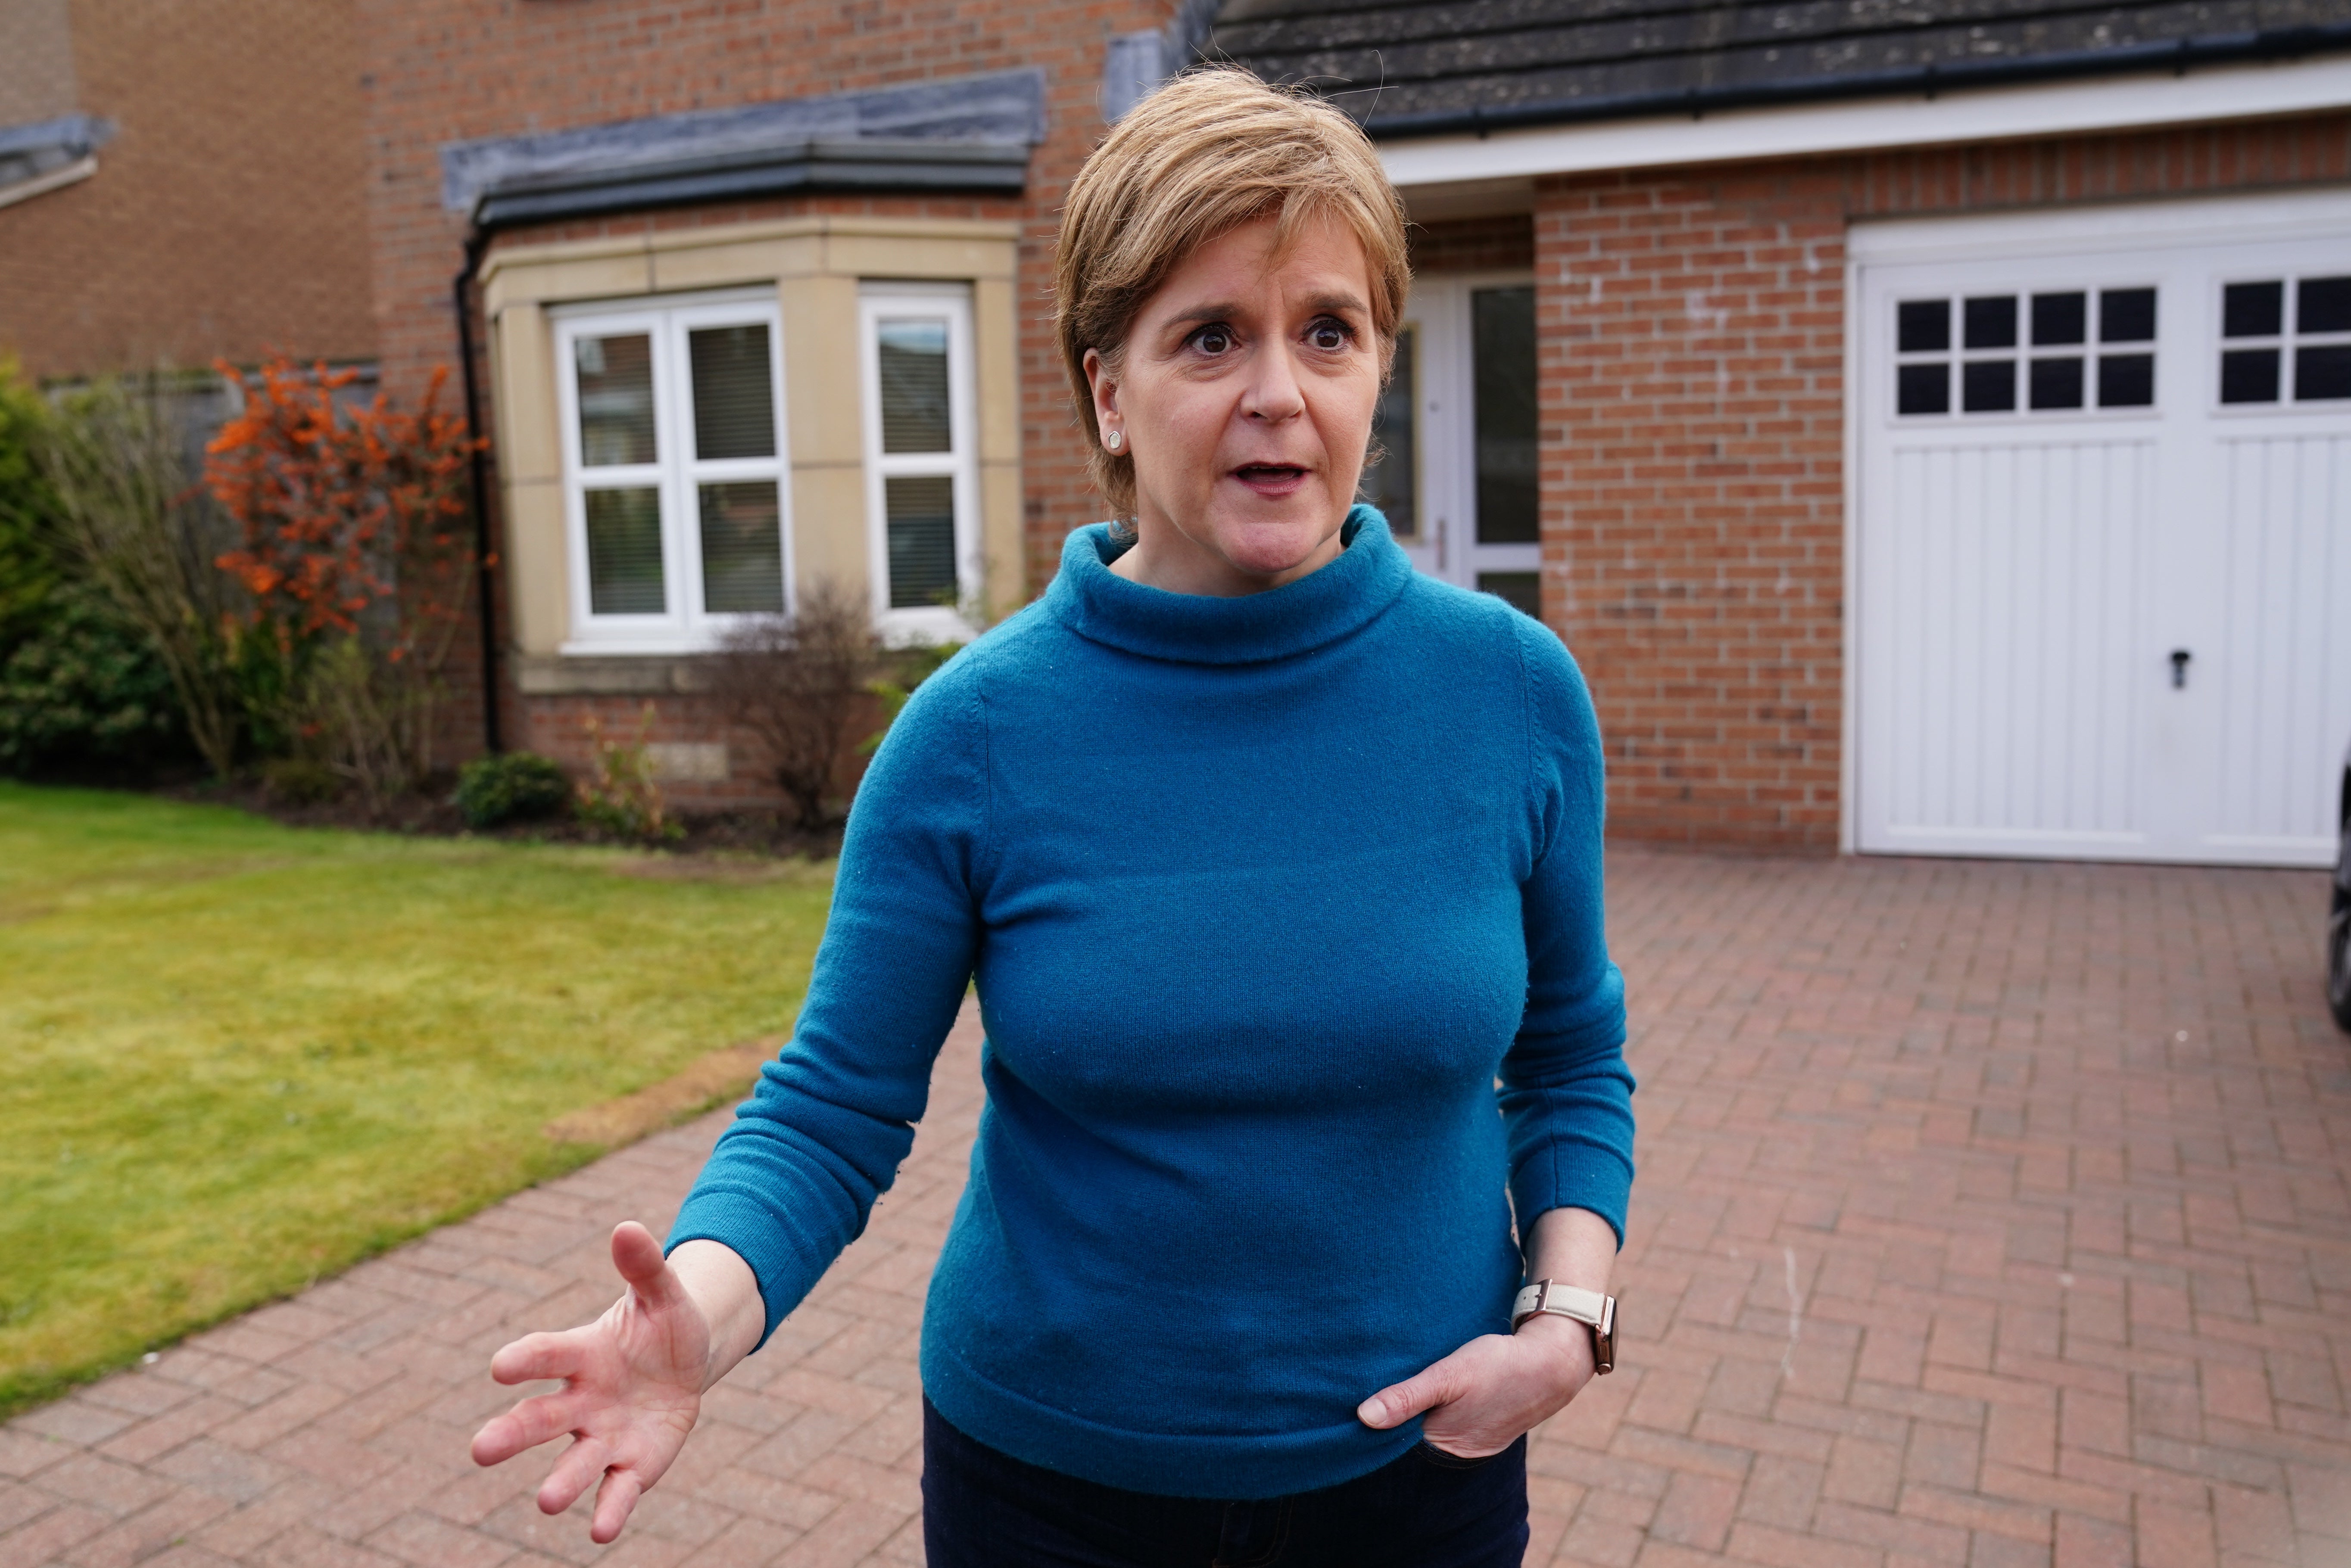 Nicola Sturgeon’s house has been searched as part of the police inquiry